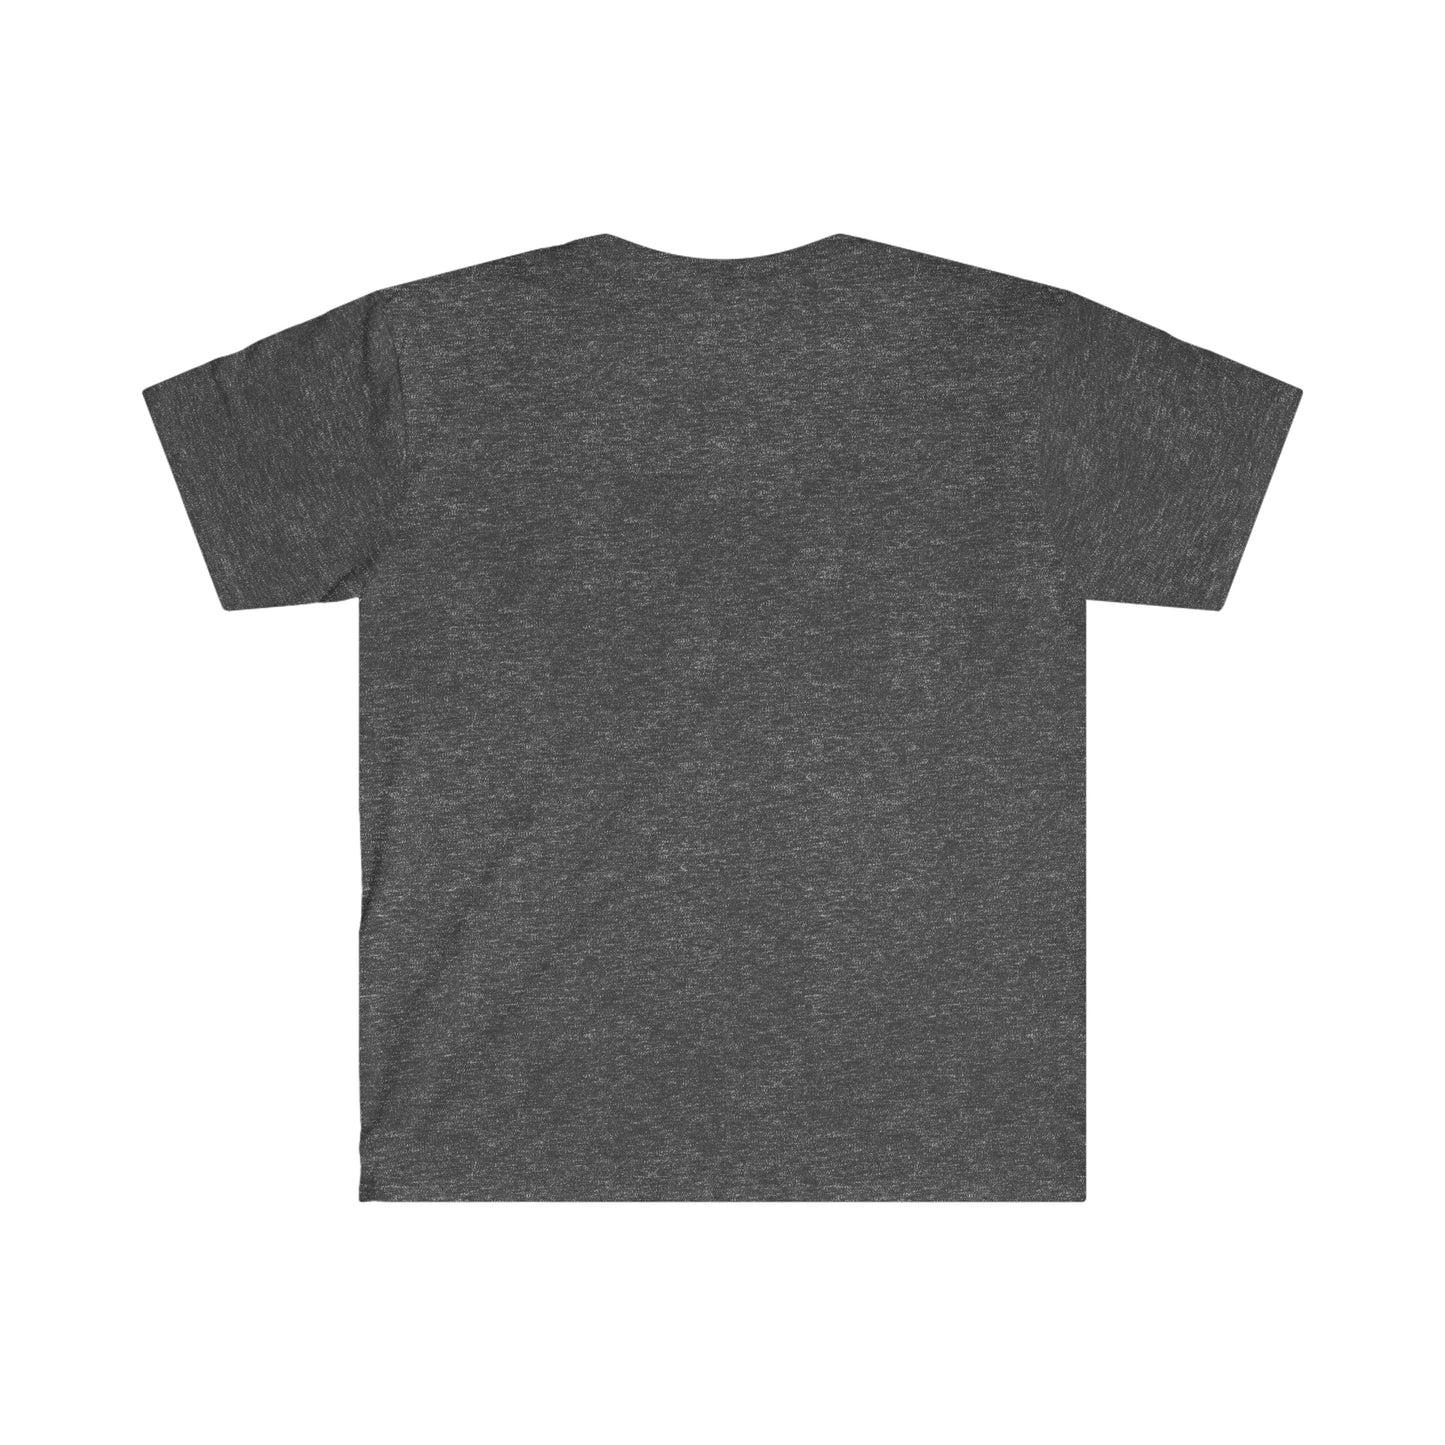 Grill Sergent Unisex Softstyle T-Shirt